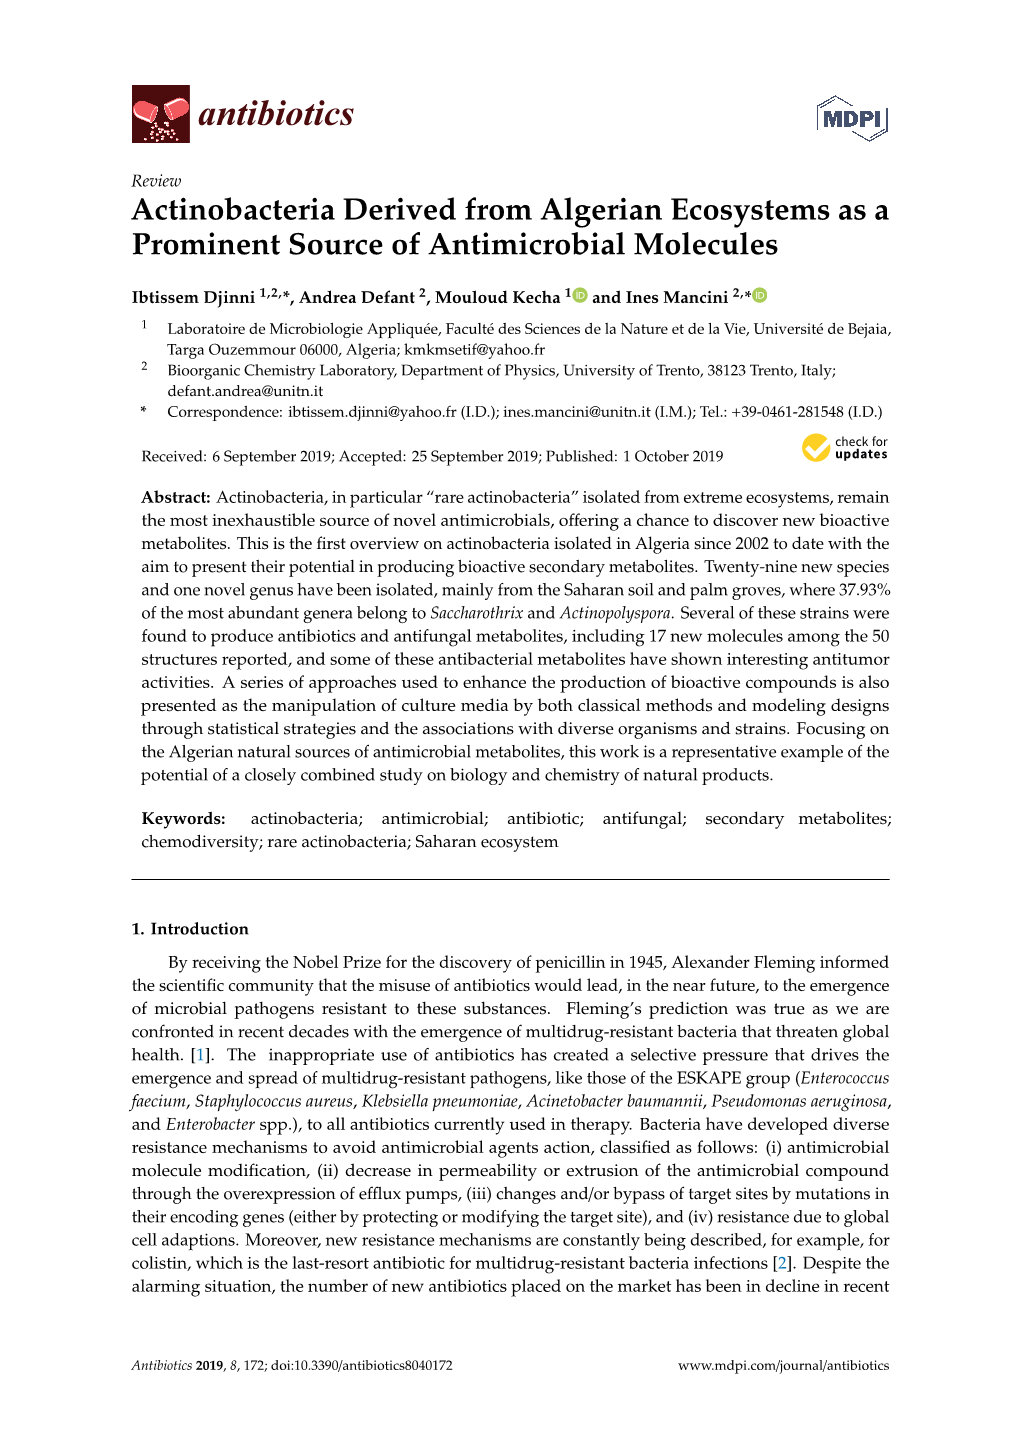 Actinobacteria Derived from Algerian Ecosystems As a Prominent Source of Antimicrobial Molecules